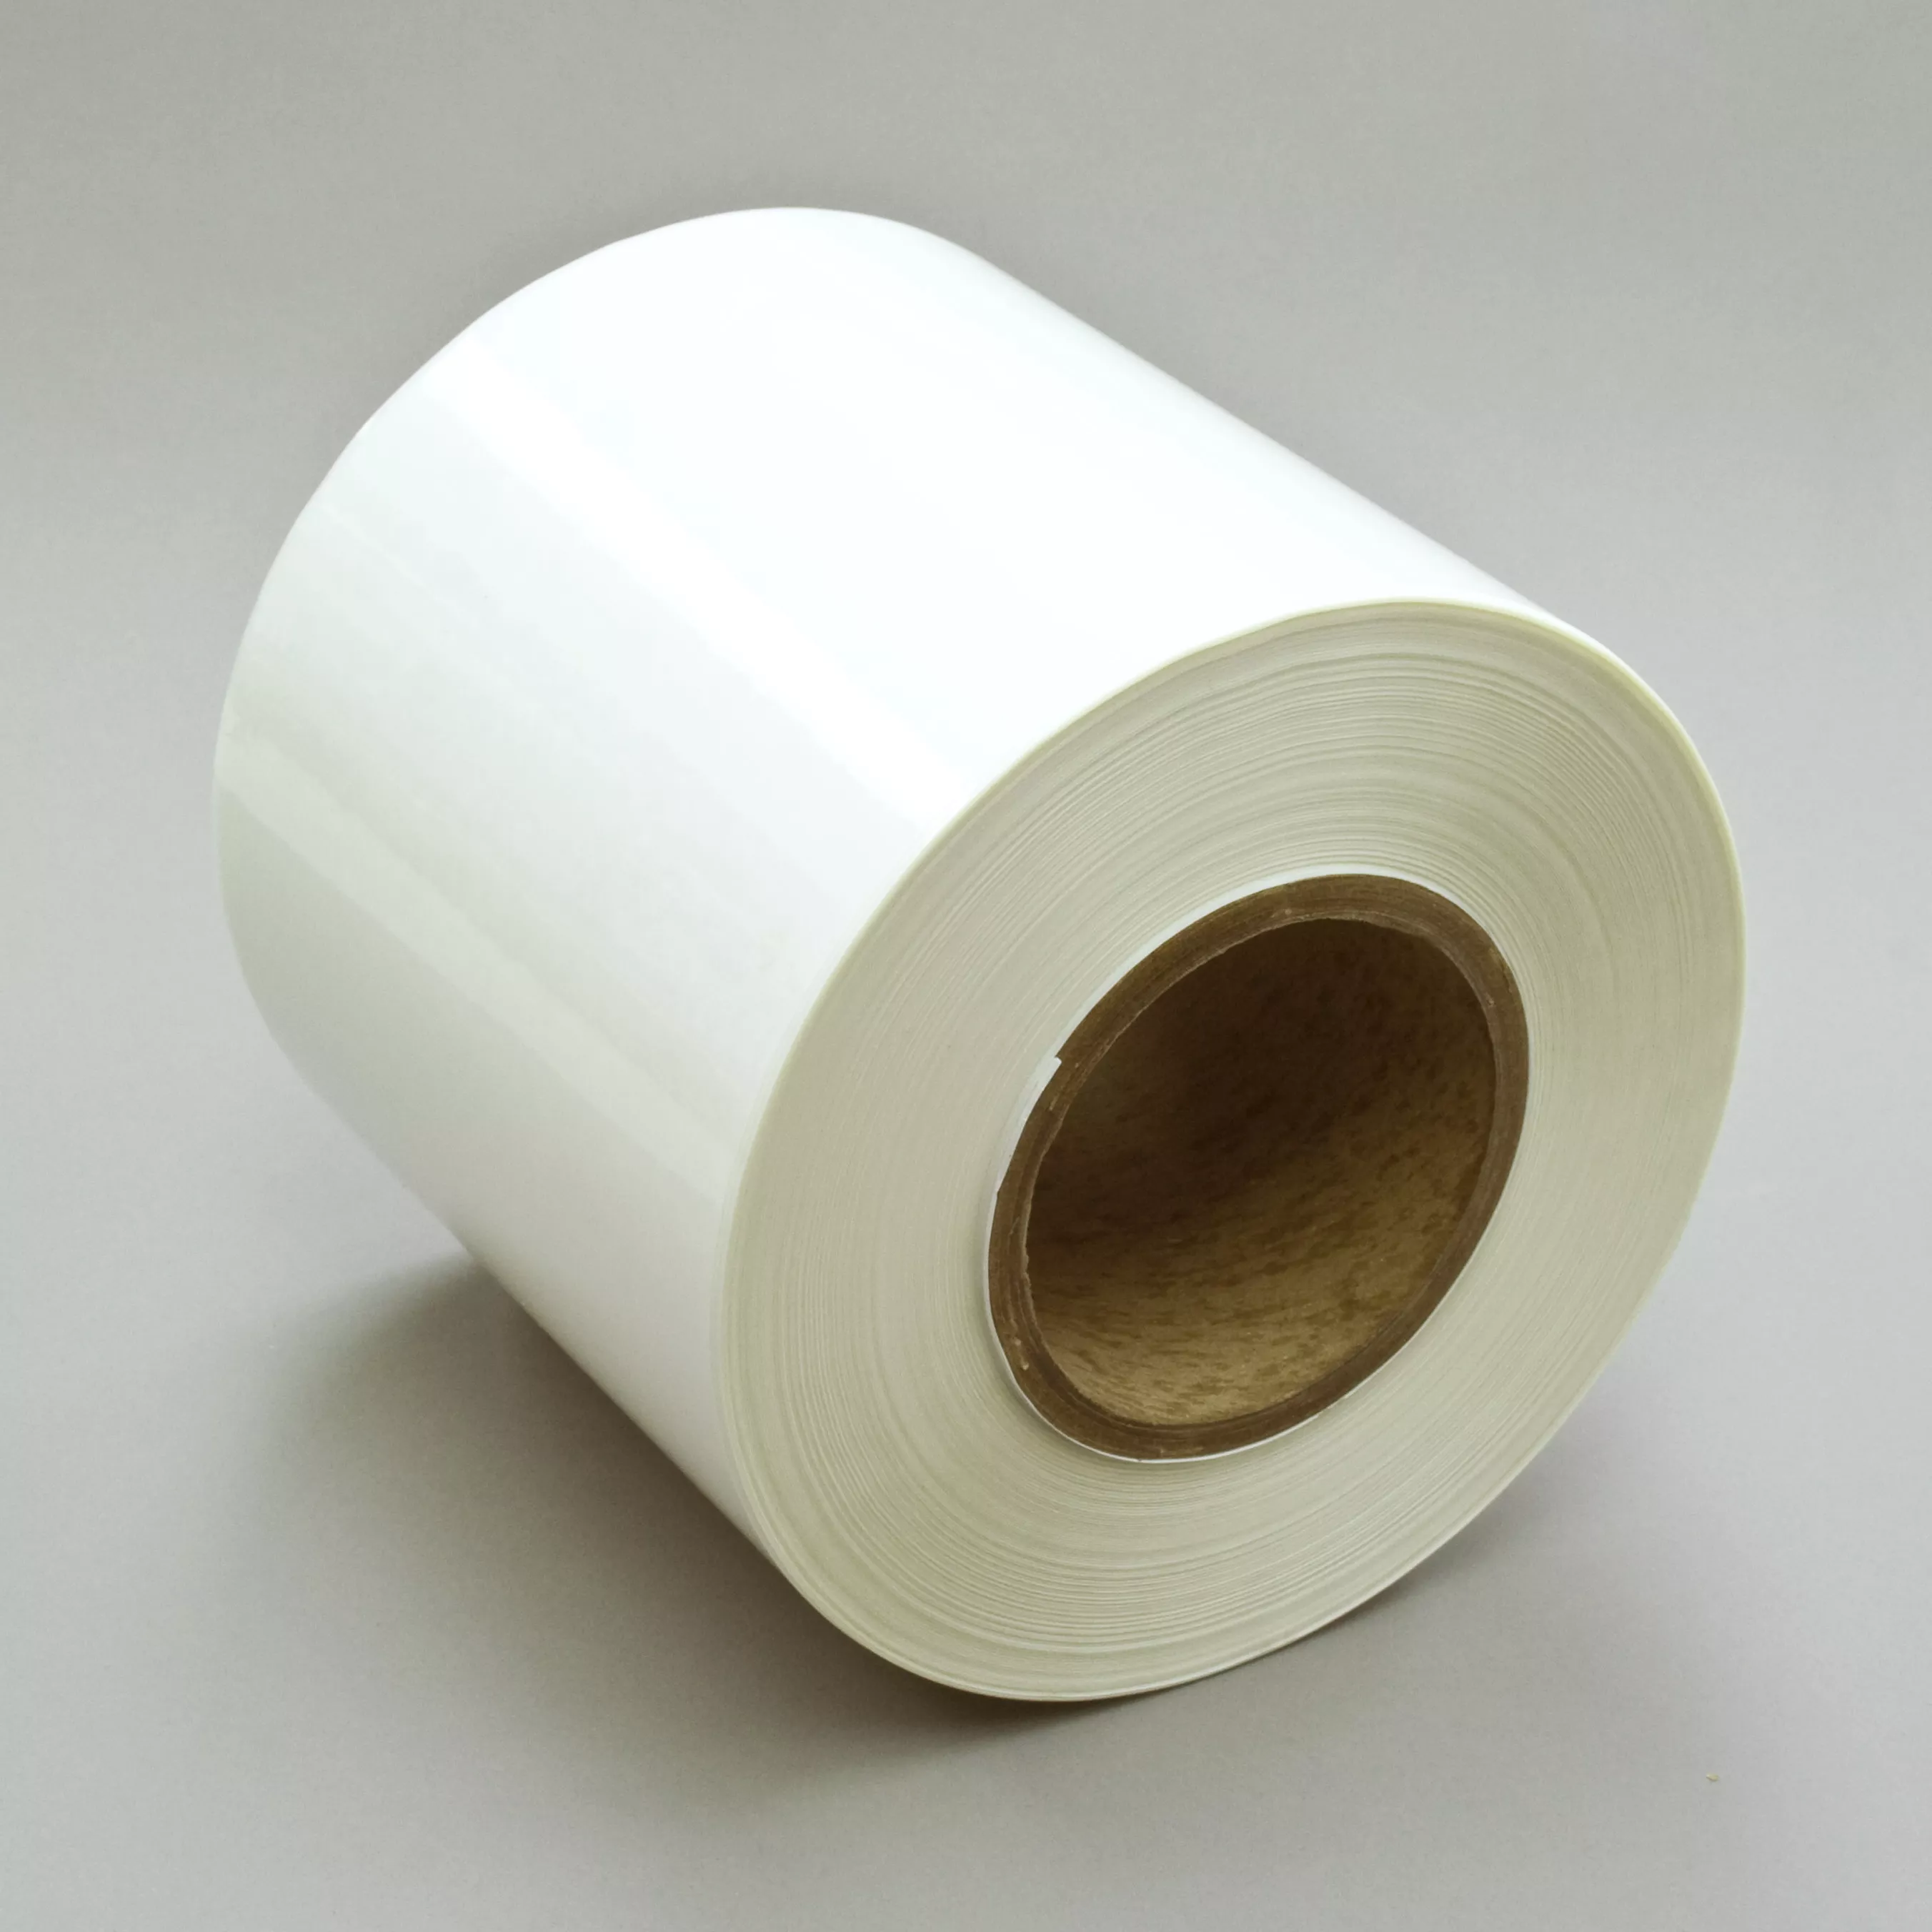 3M™ Overlaminate Label Material 7745FL, Matte Clear Polyester, 6 in x
1668 ft, 1 Roll/Case